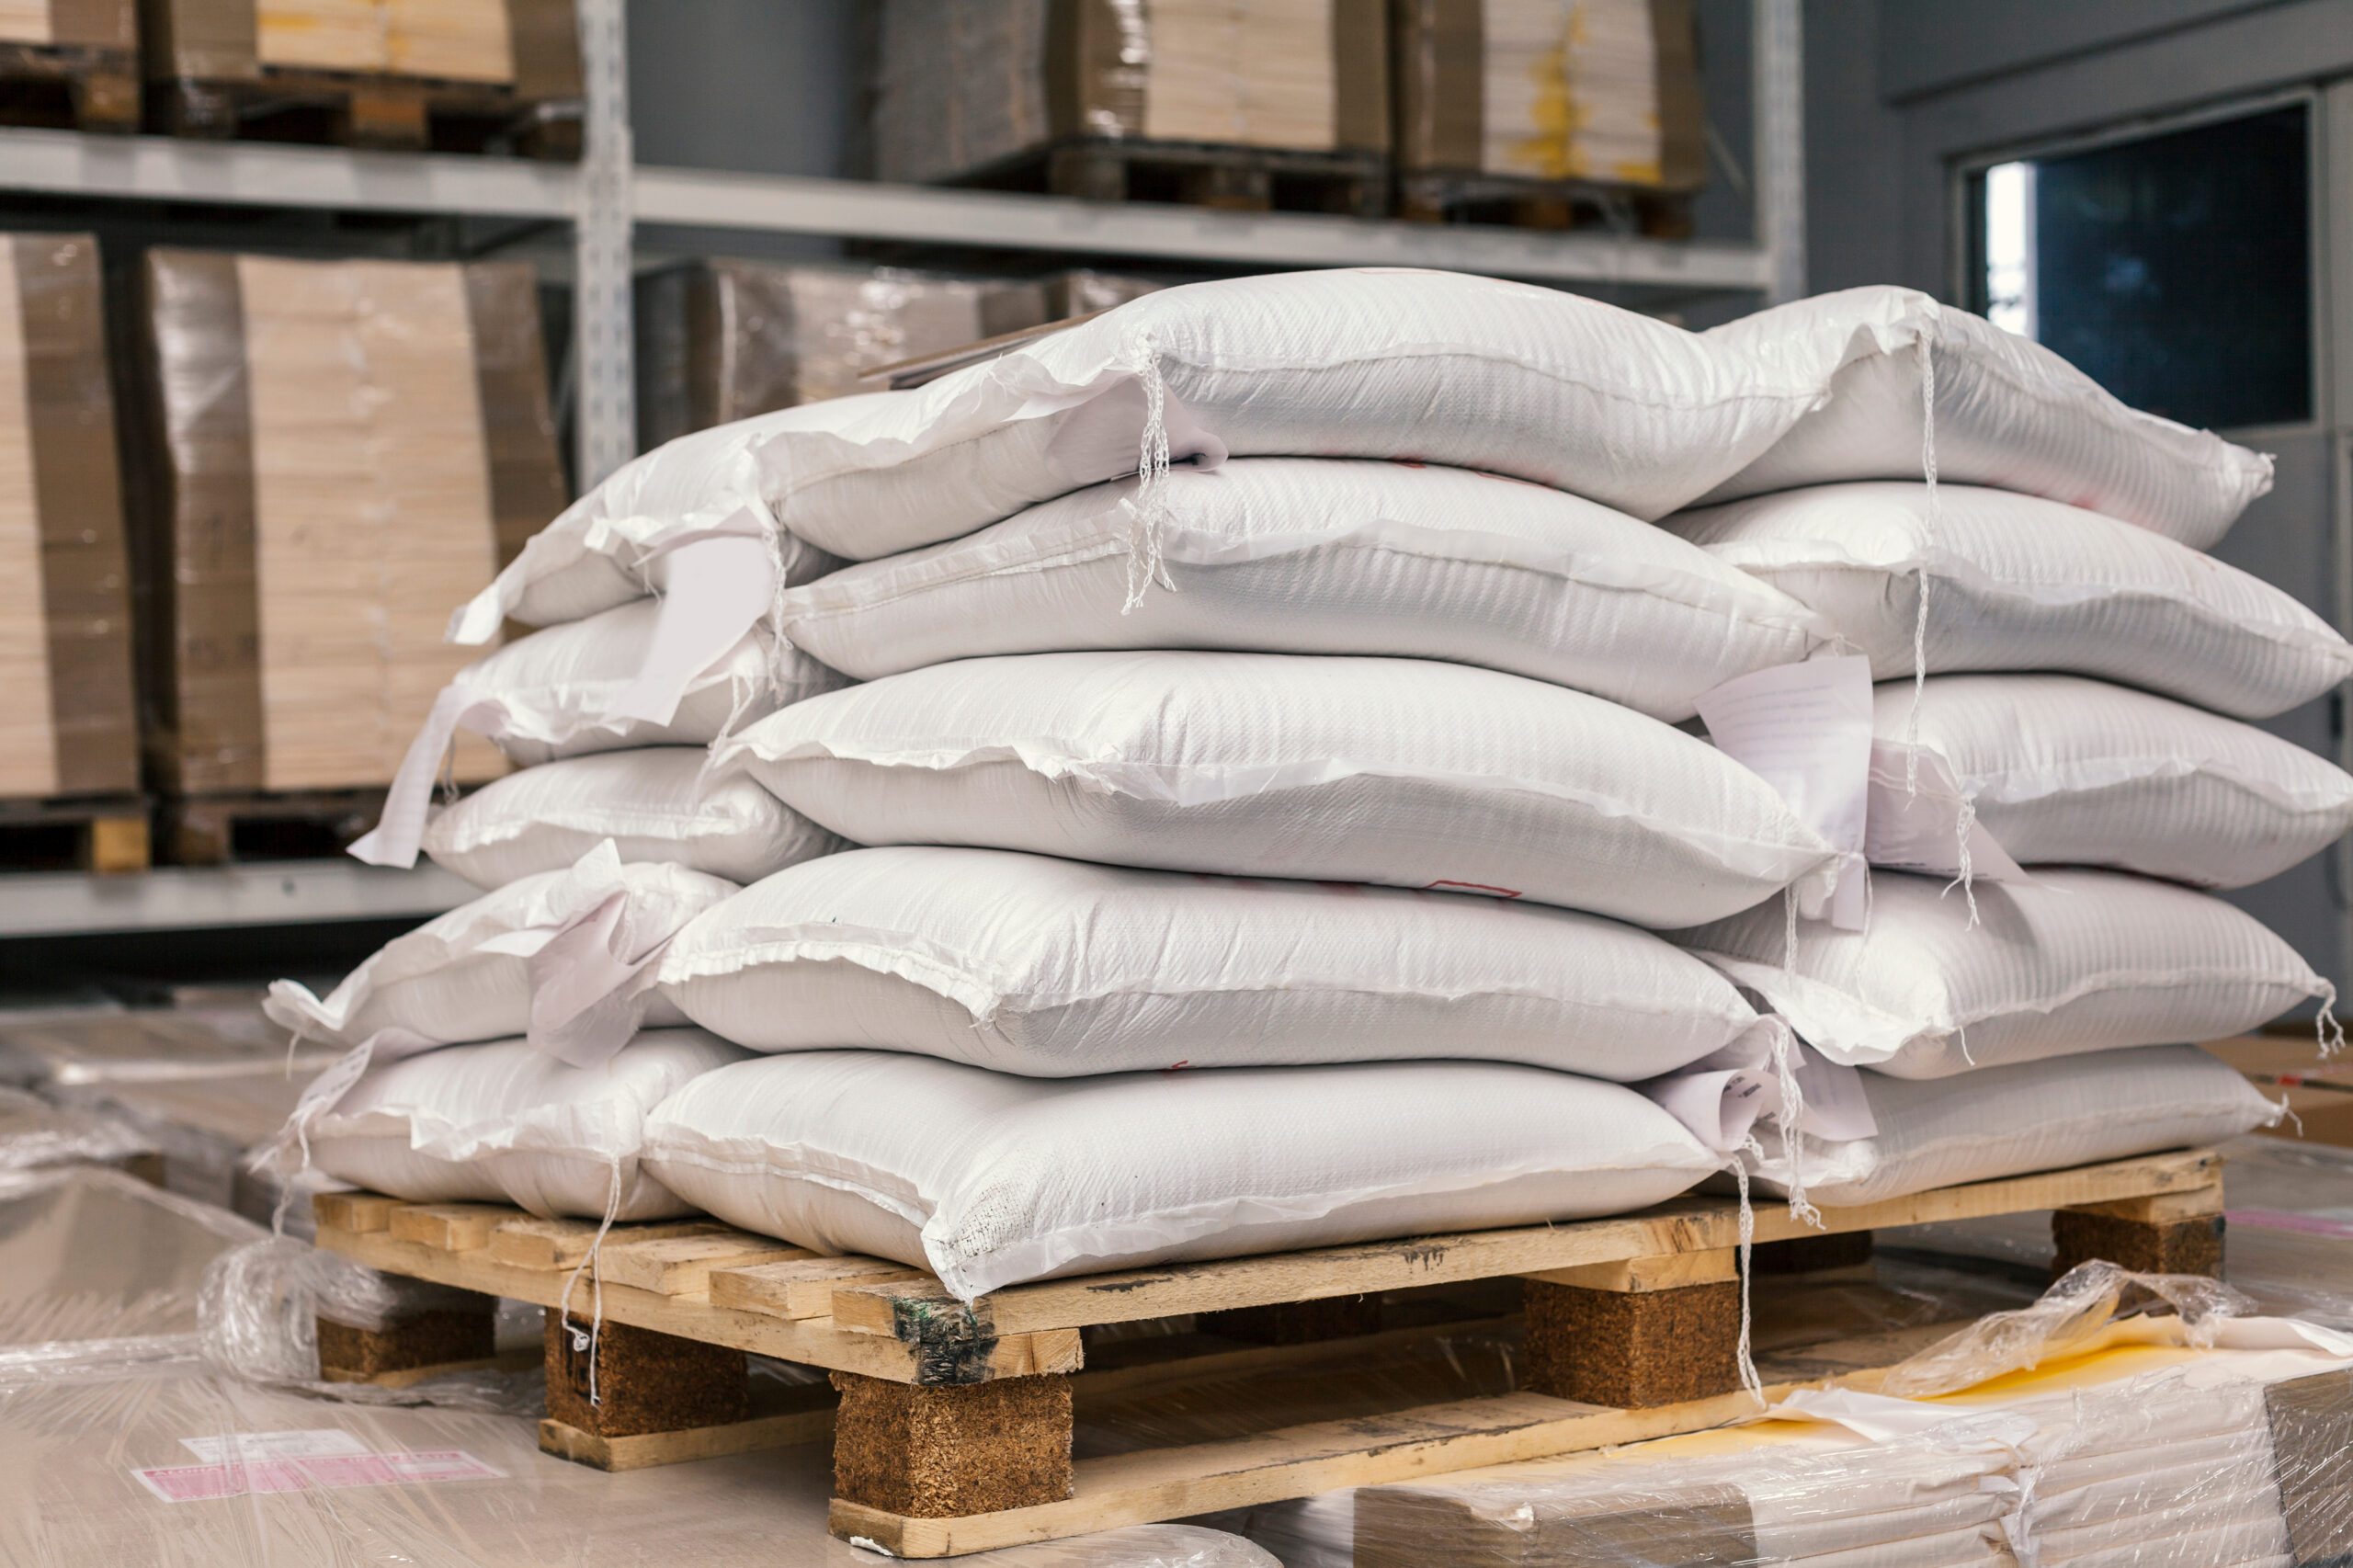 Large sacks on pallets in warehouse